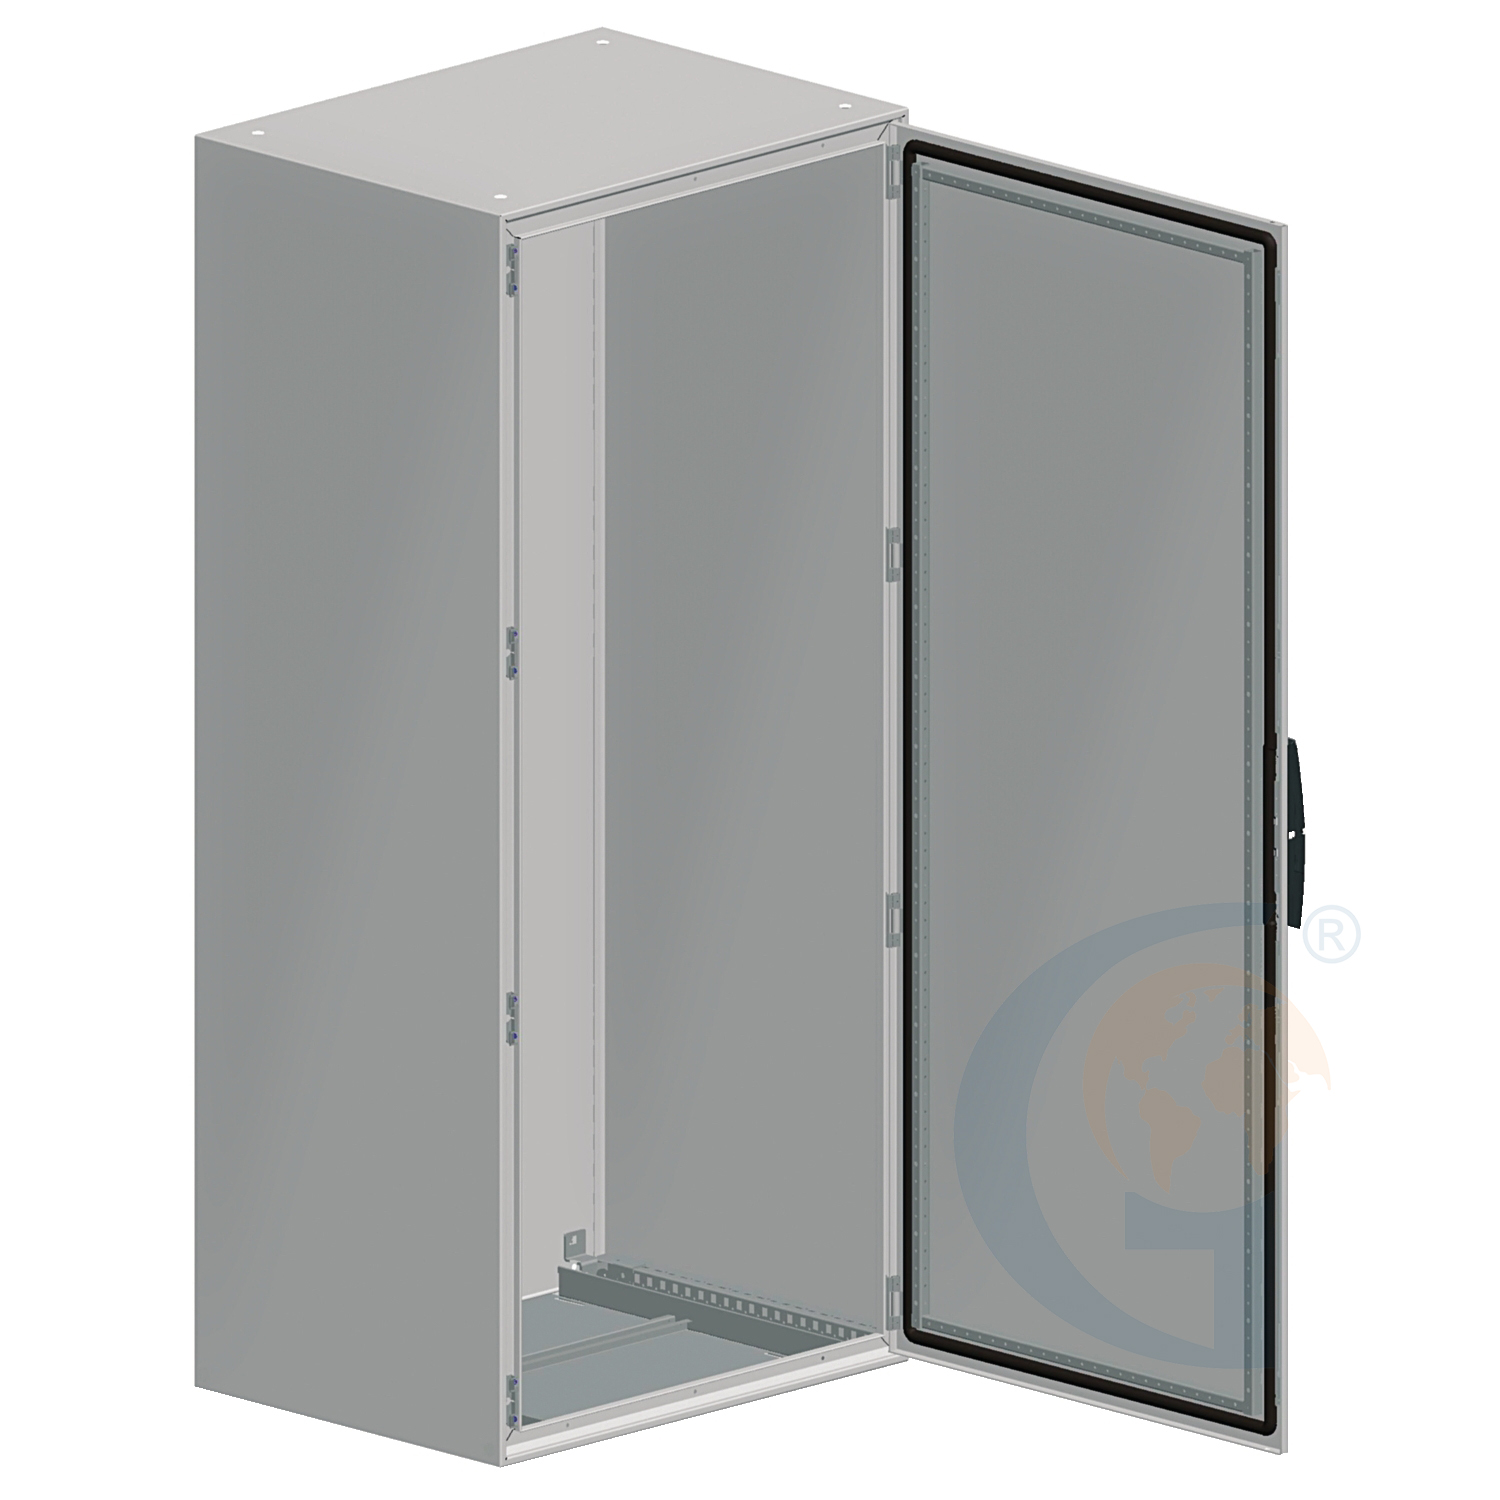 Schneider Electric NSYSM18630 SPACIAL SM COMPACT ENCLOSURE WITHOUT MOUNTING PLATE – 1800X600X300 MM https://gesrepair.com/wp-content/uploads/2020/Schneider/Schneider_Electric_NSYSM18630_.jpg